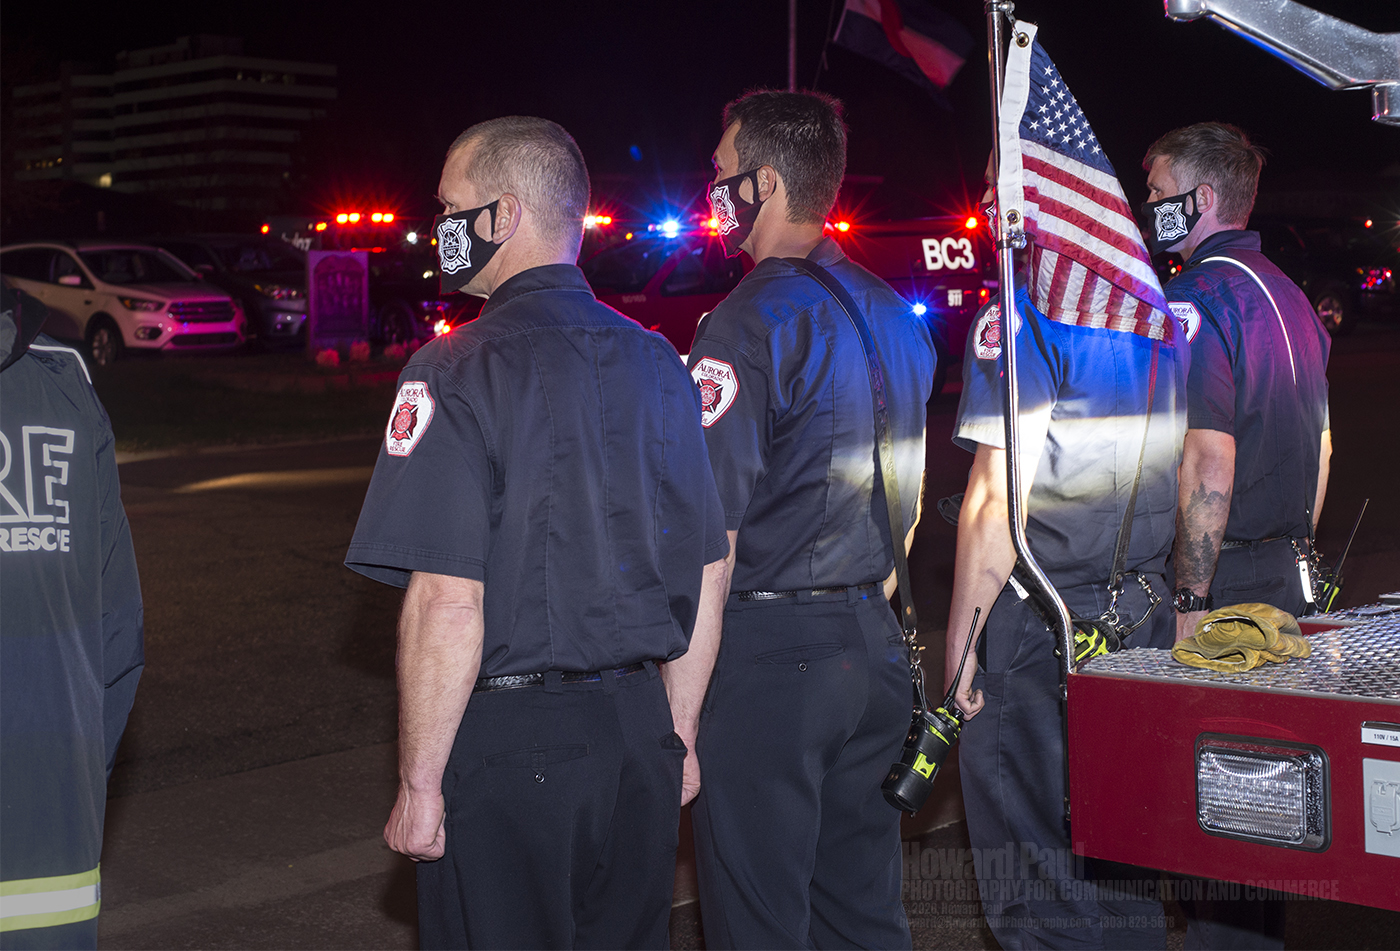 An Aurora Fire Department truck company at the entrance to the cemetery. AFD and Denver Fire Department aerial ladders flanked the entrance, with a large American flag suspended between them.